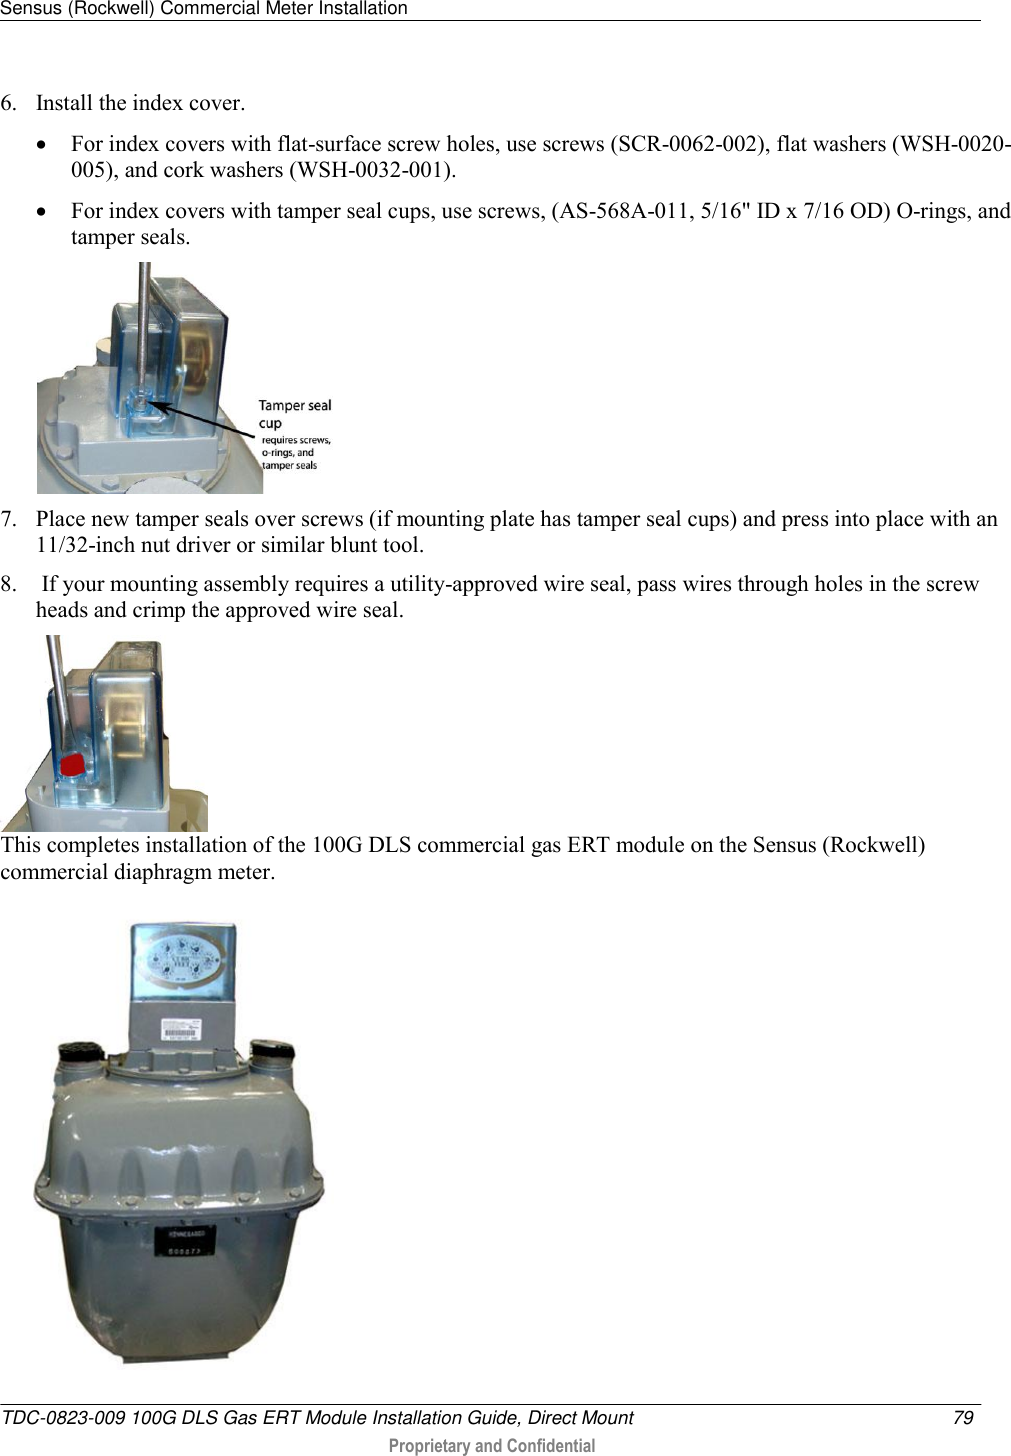 Sensus (Rockwell) Commercial Meter Installation   TDC-0823-009 100G DLS Gas ERT Module Installation Guide, Direct Mount  79   Proprietary and Confidential     6. Install the index cover.   For index covers with flat-surface screw holes, use screws (SCR-0062-002), flat washers (WSH-0020-005), and cork washers (WSH-0032-001).   For index covers with tamper seal cups, use screws, (AS-568A-011, 5/16&quot; ID x 7/16 OD) O-rings, and tamper seals.   7. Place new tamper seals over screws (if mounting plate has tamper seal cups) and press into place with an 11/32-inch nut driver or similar blunt tool. 8.  If your mounting assembly requires a utility-approved wire seal, pass wires through holes in the screw heads and crimp the approved wire seal.  This completes installation of the 100G DLS commercial gas ERT module on the Sensus (Rockwell) commercial diaphragm meter.   